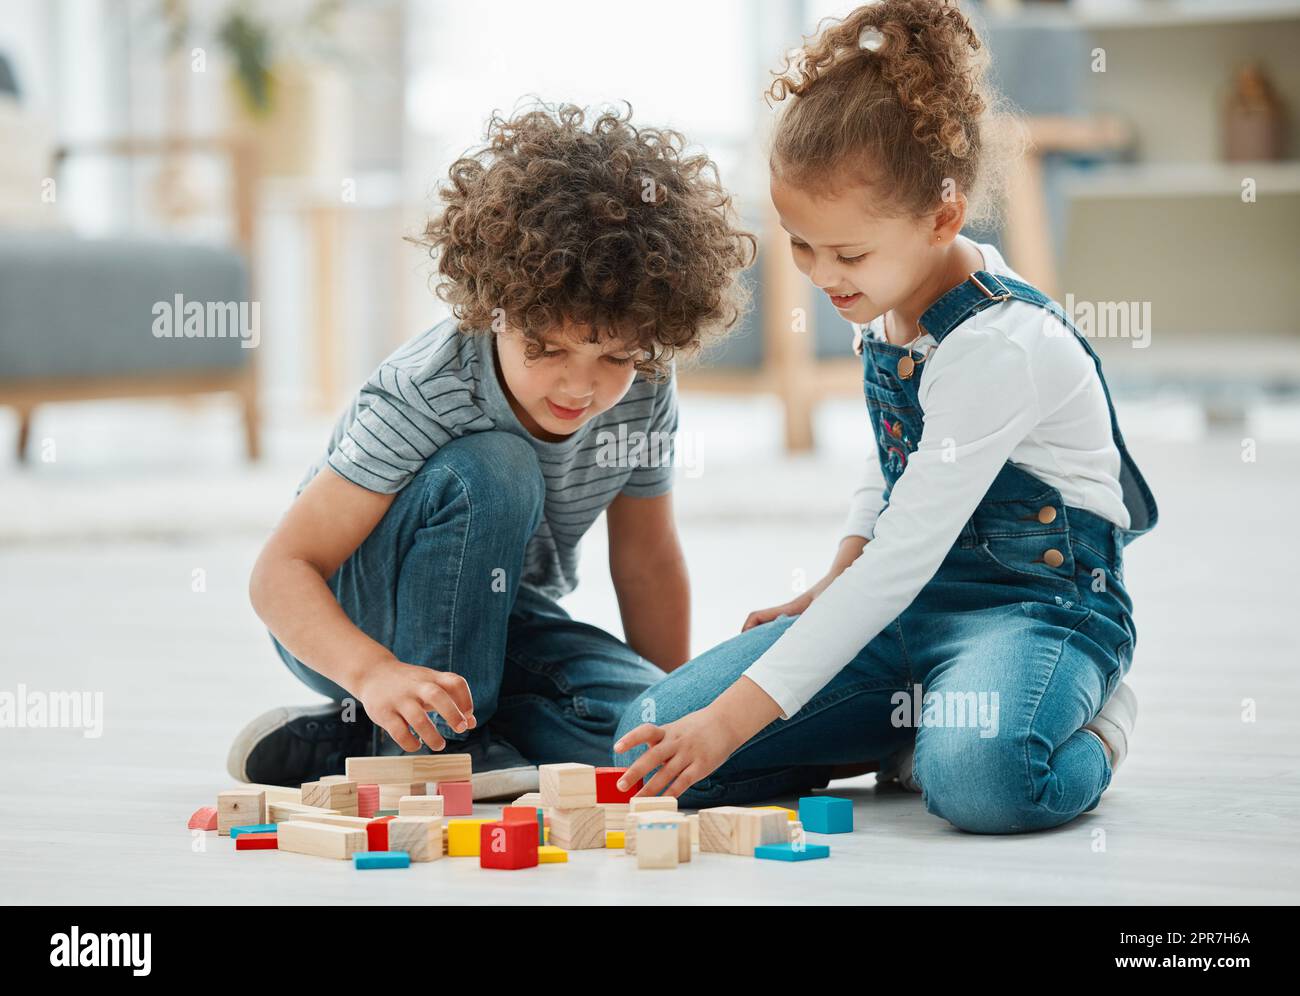 What shape do you want to make. two siblings playing with building blocks. Stock Photo